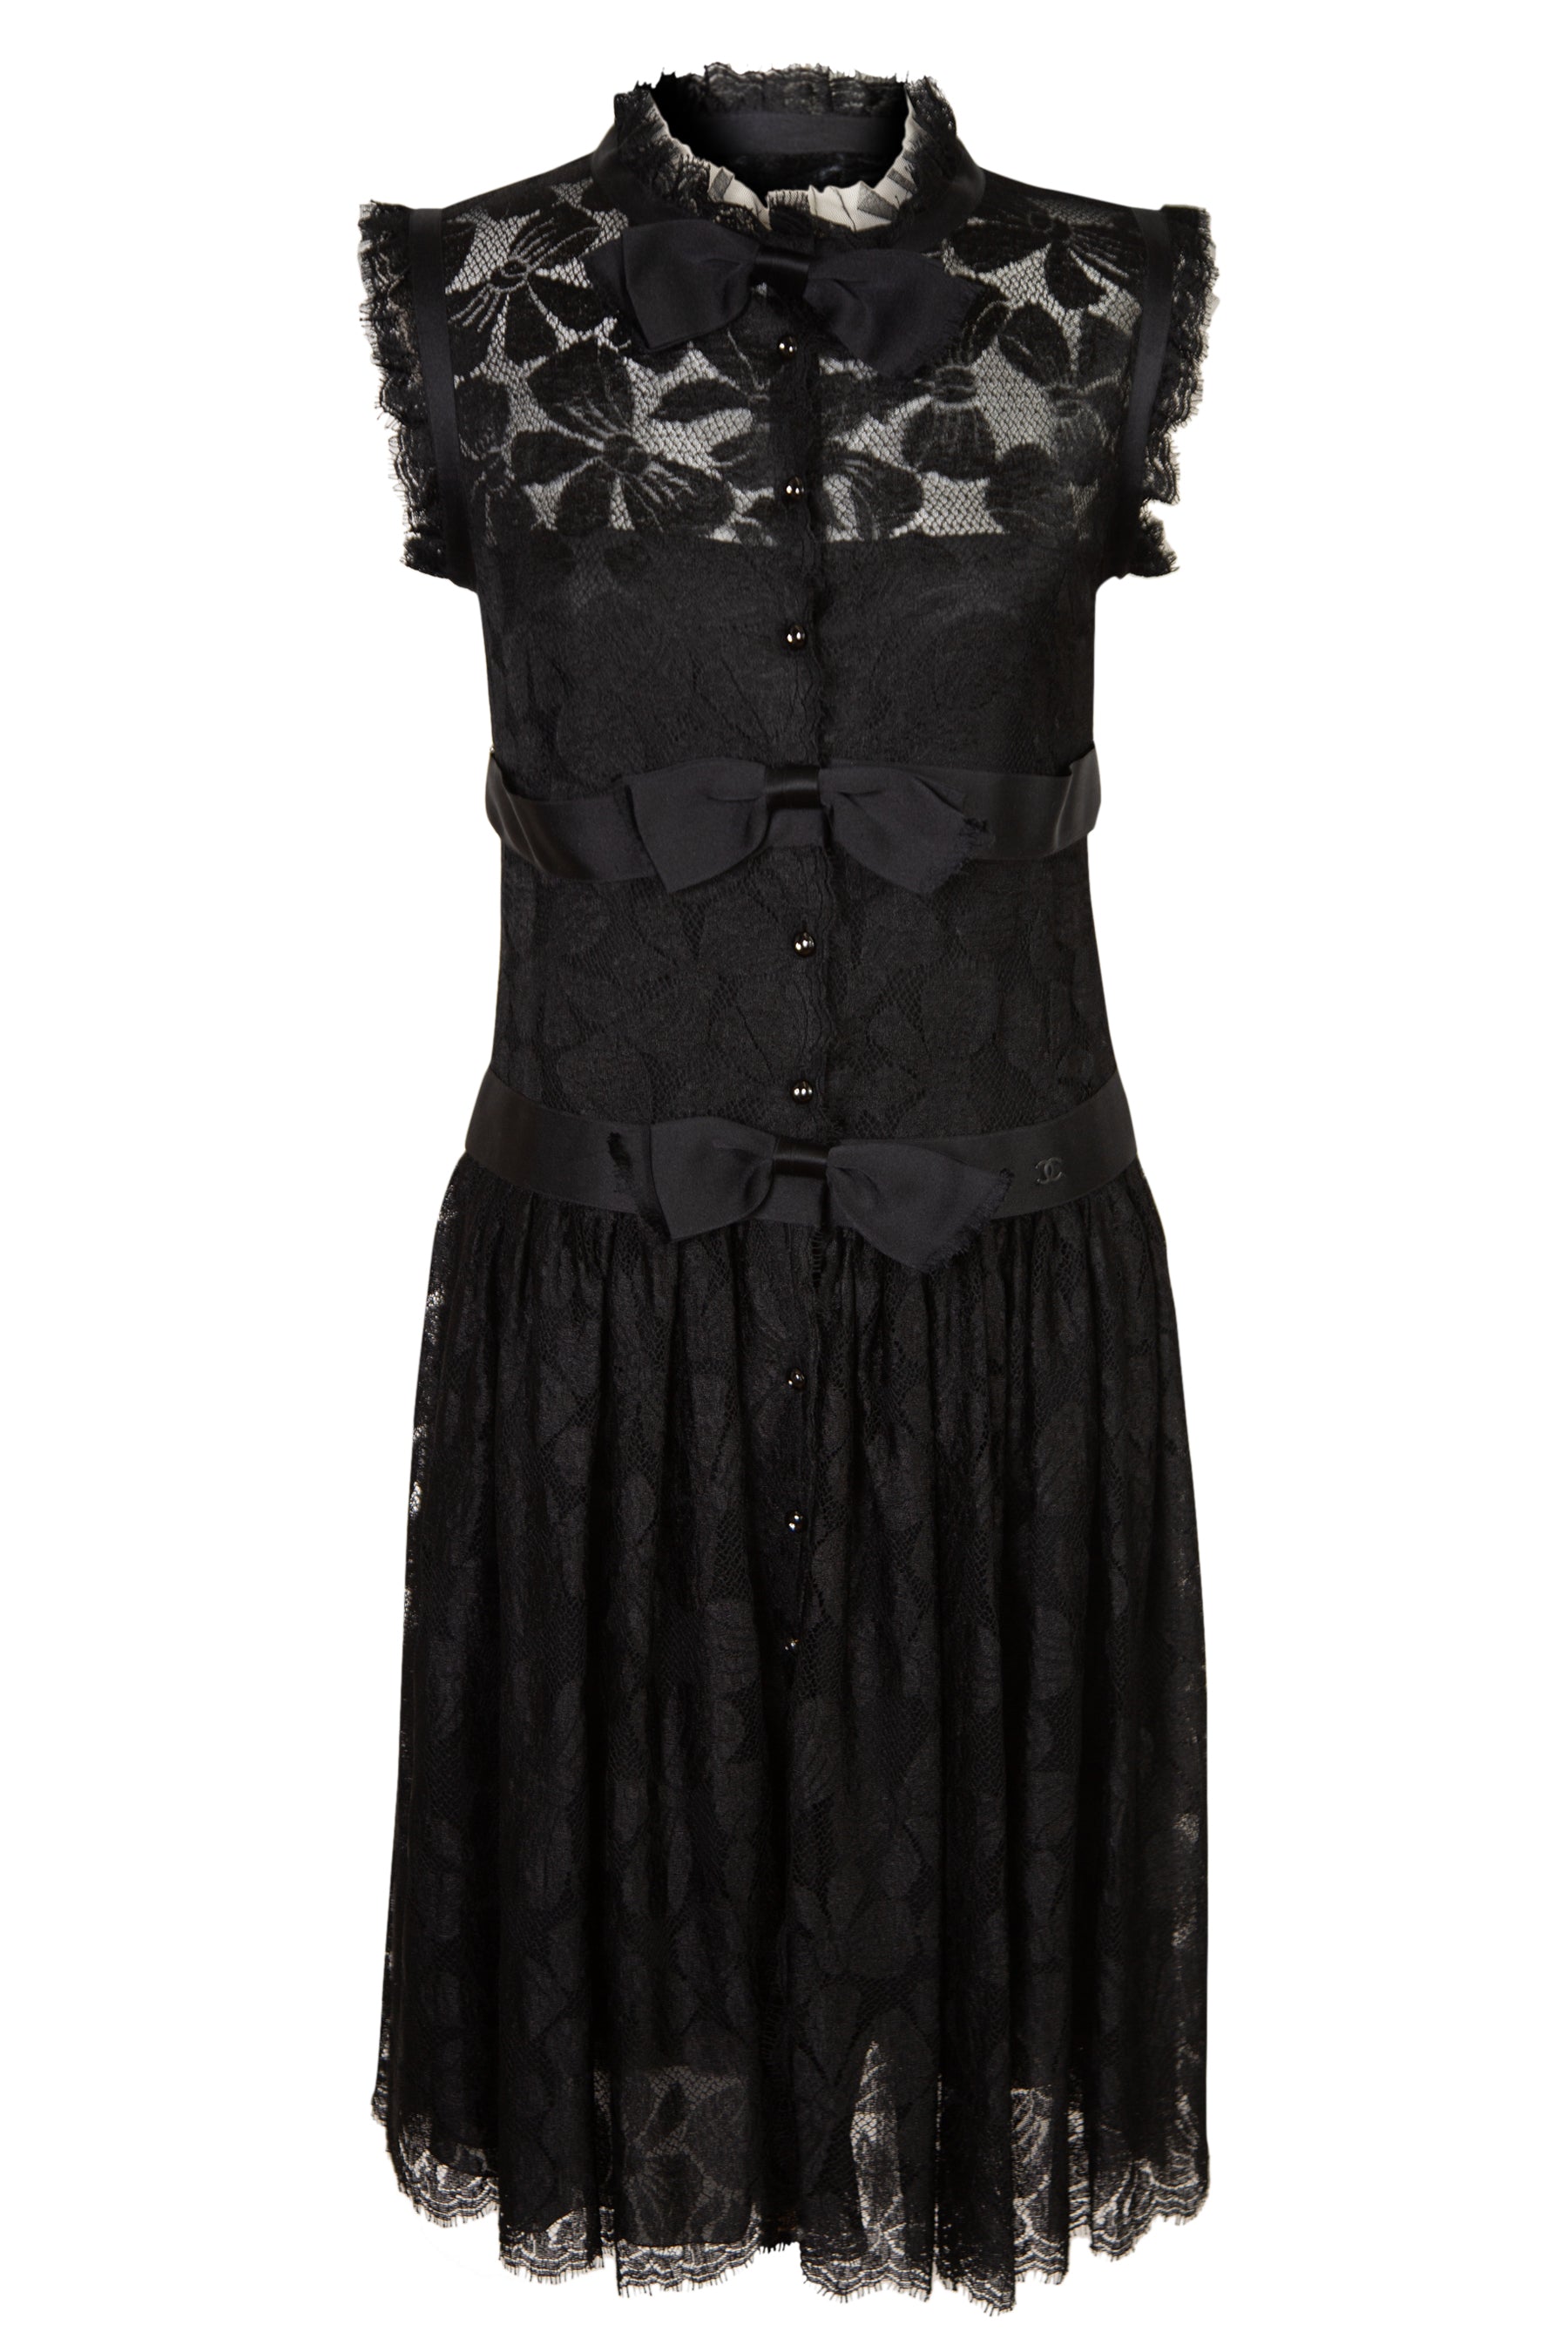 Chanel Vintage Black Lace Short Dress With Bows at Front